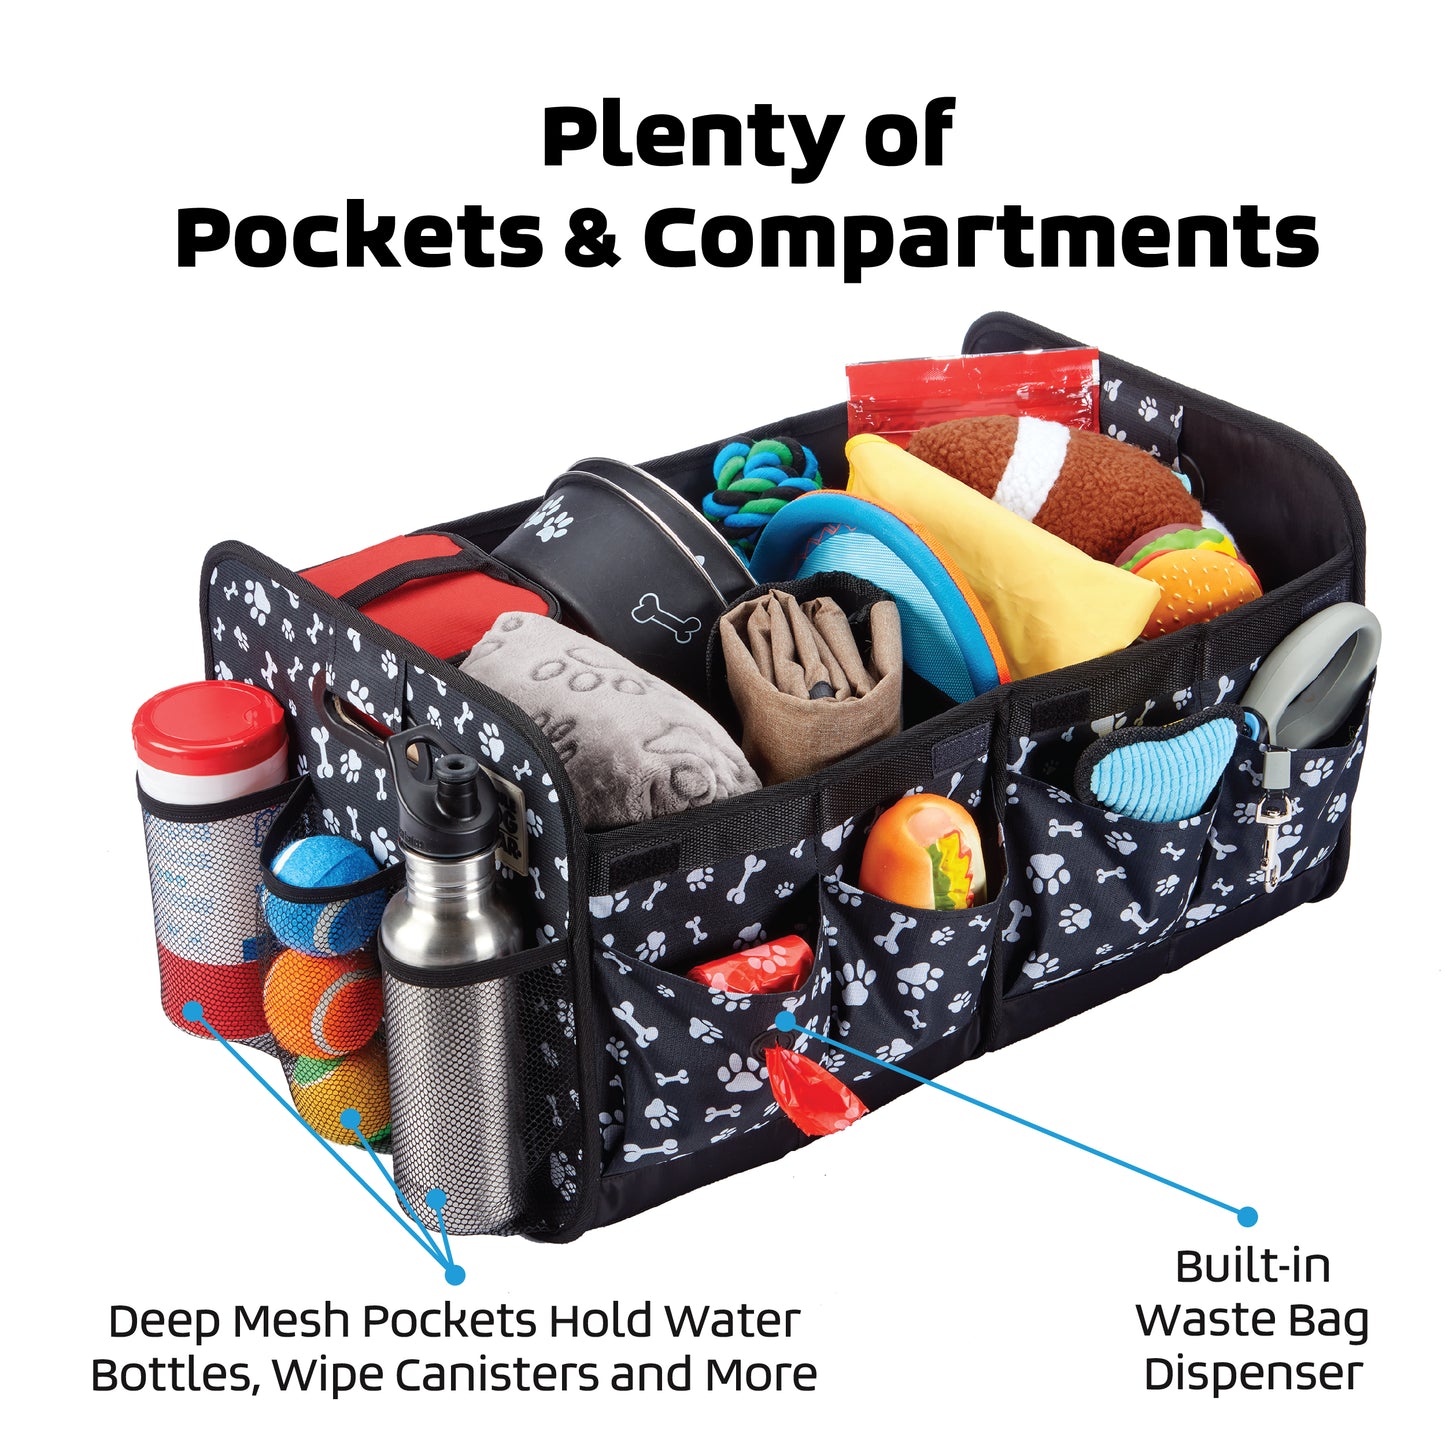 On-the-Go Companion: The Mobile Dog Gear Collapsible Organizer for Convenient Travel with Your Pet